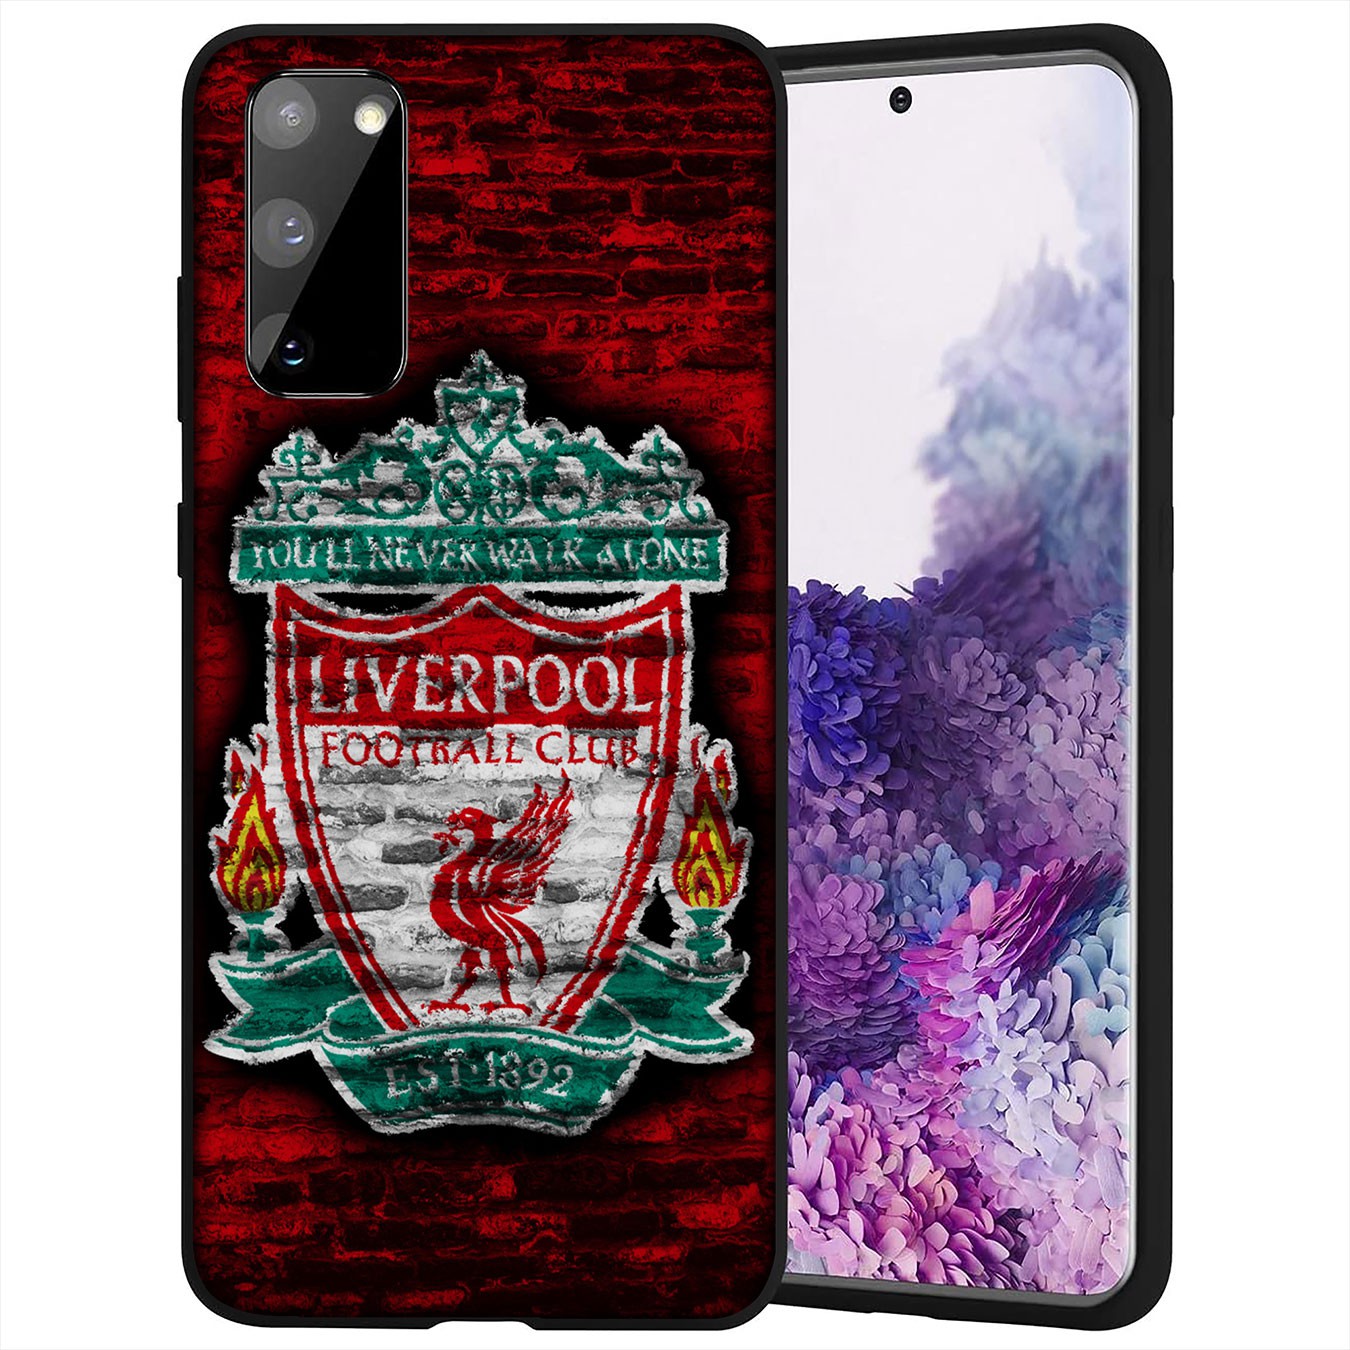 Samsung Galaxy A02S J2 J4 J5 J6 Plus J7 Prime A02 M02 j6+ A42 + Casing Soft Silicone logo Liverpool Football Phone Case